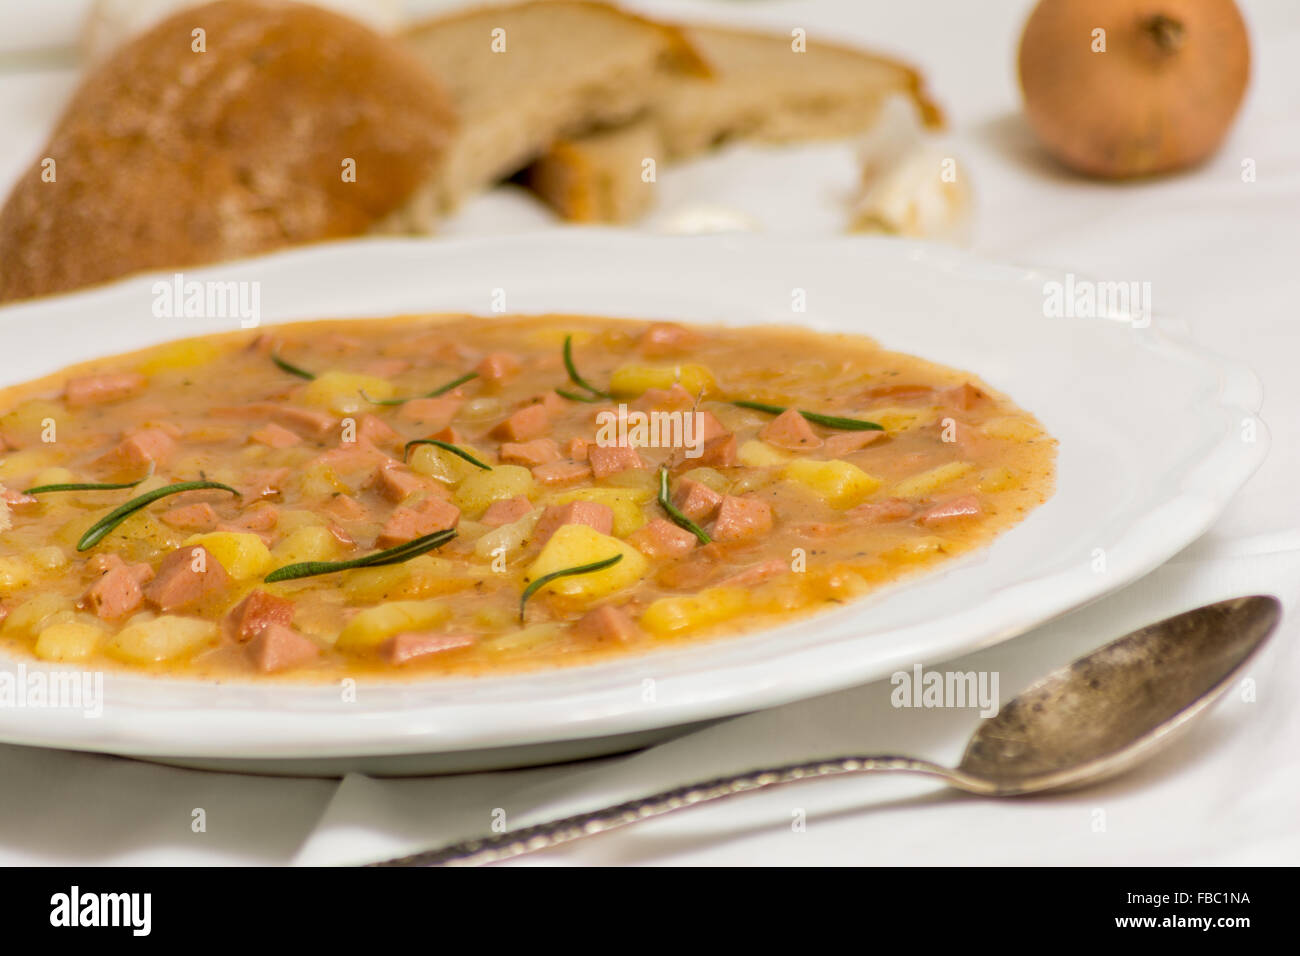 Czech traditional potato goulash with sausage and bread Stock Photo